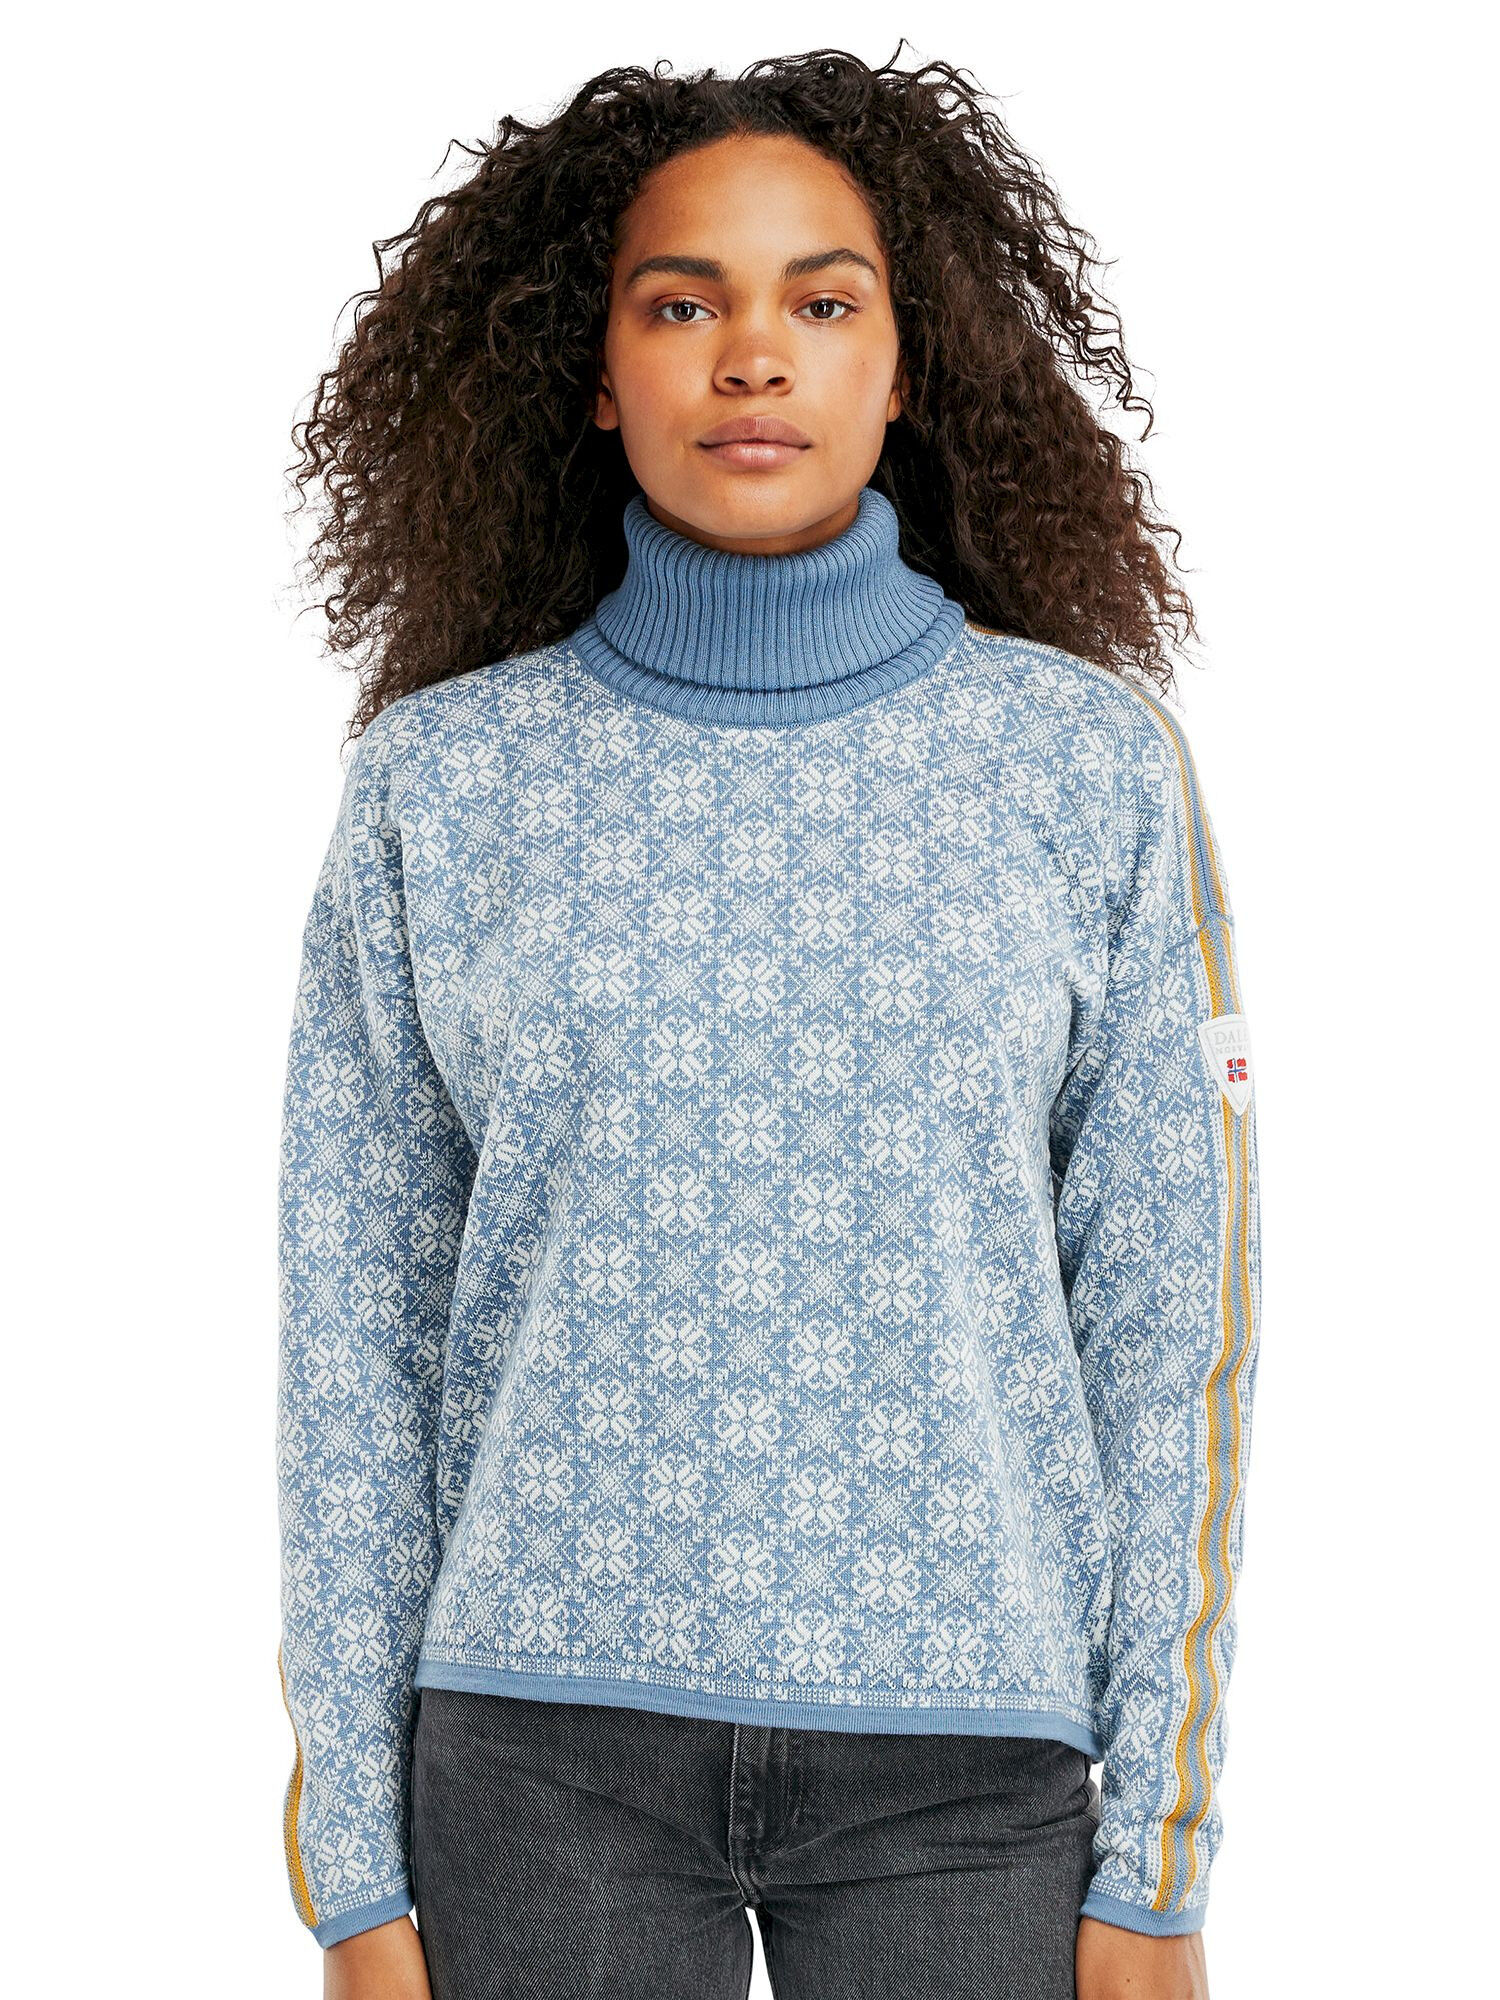 Dale of Norway Frida Sweater - Pullover - Naiset